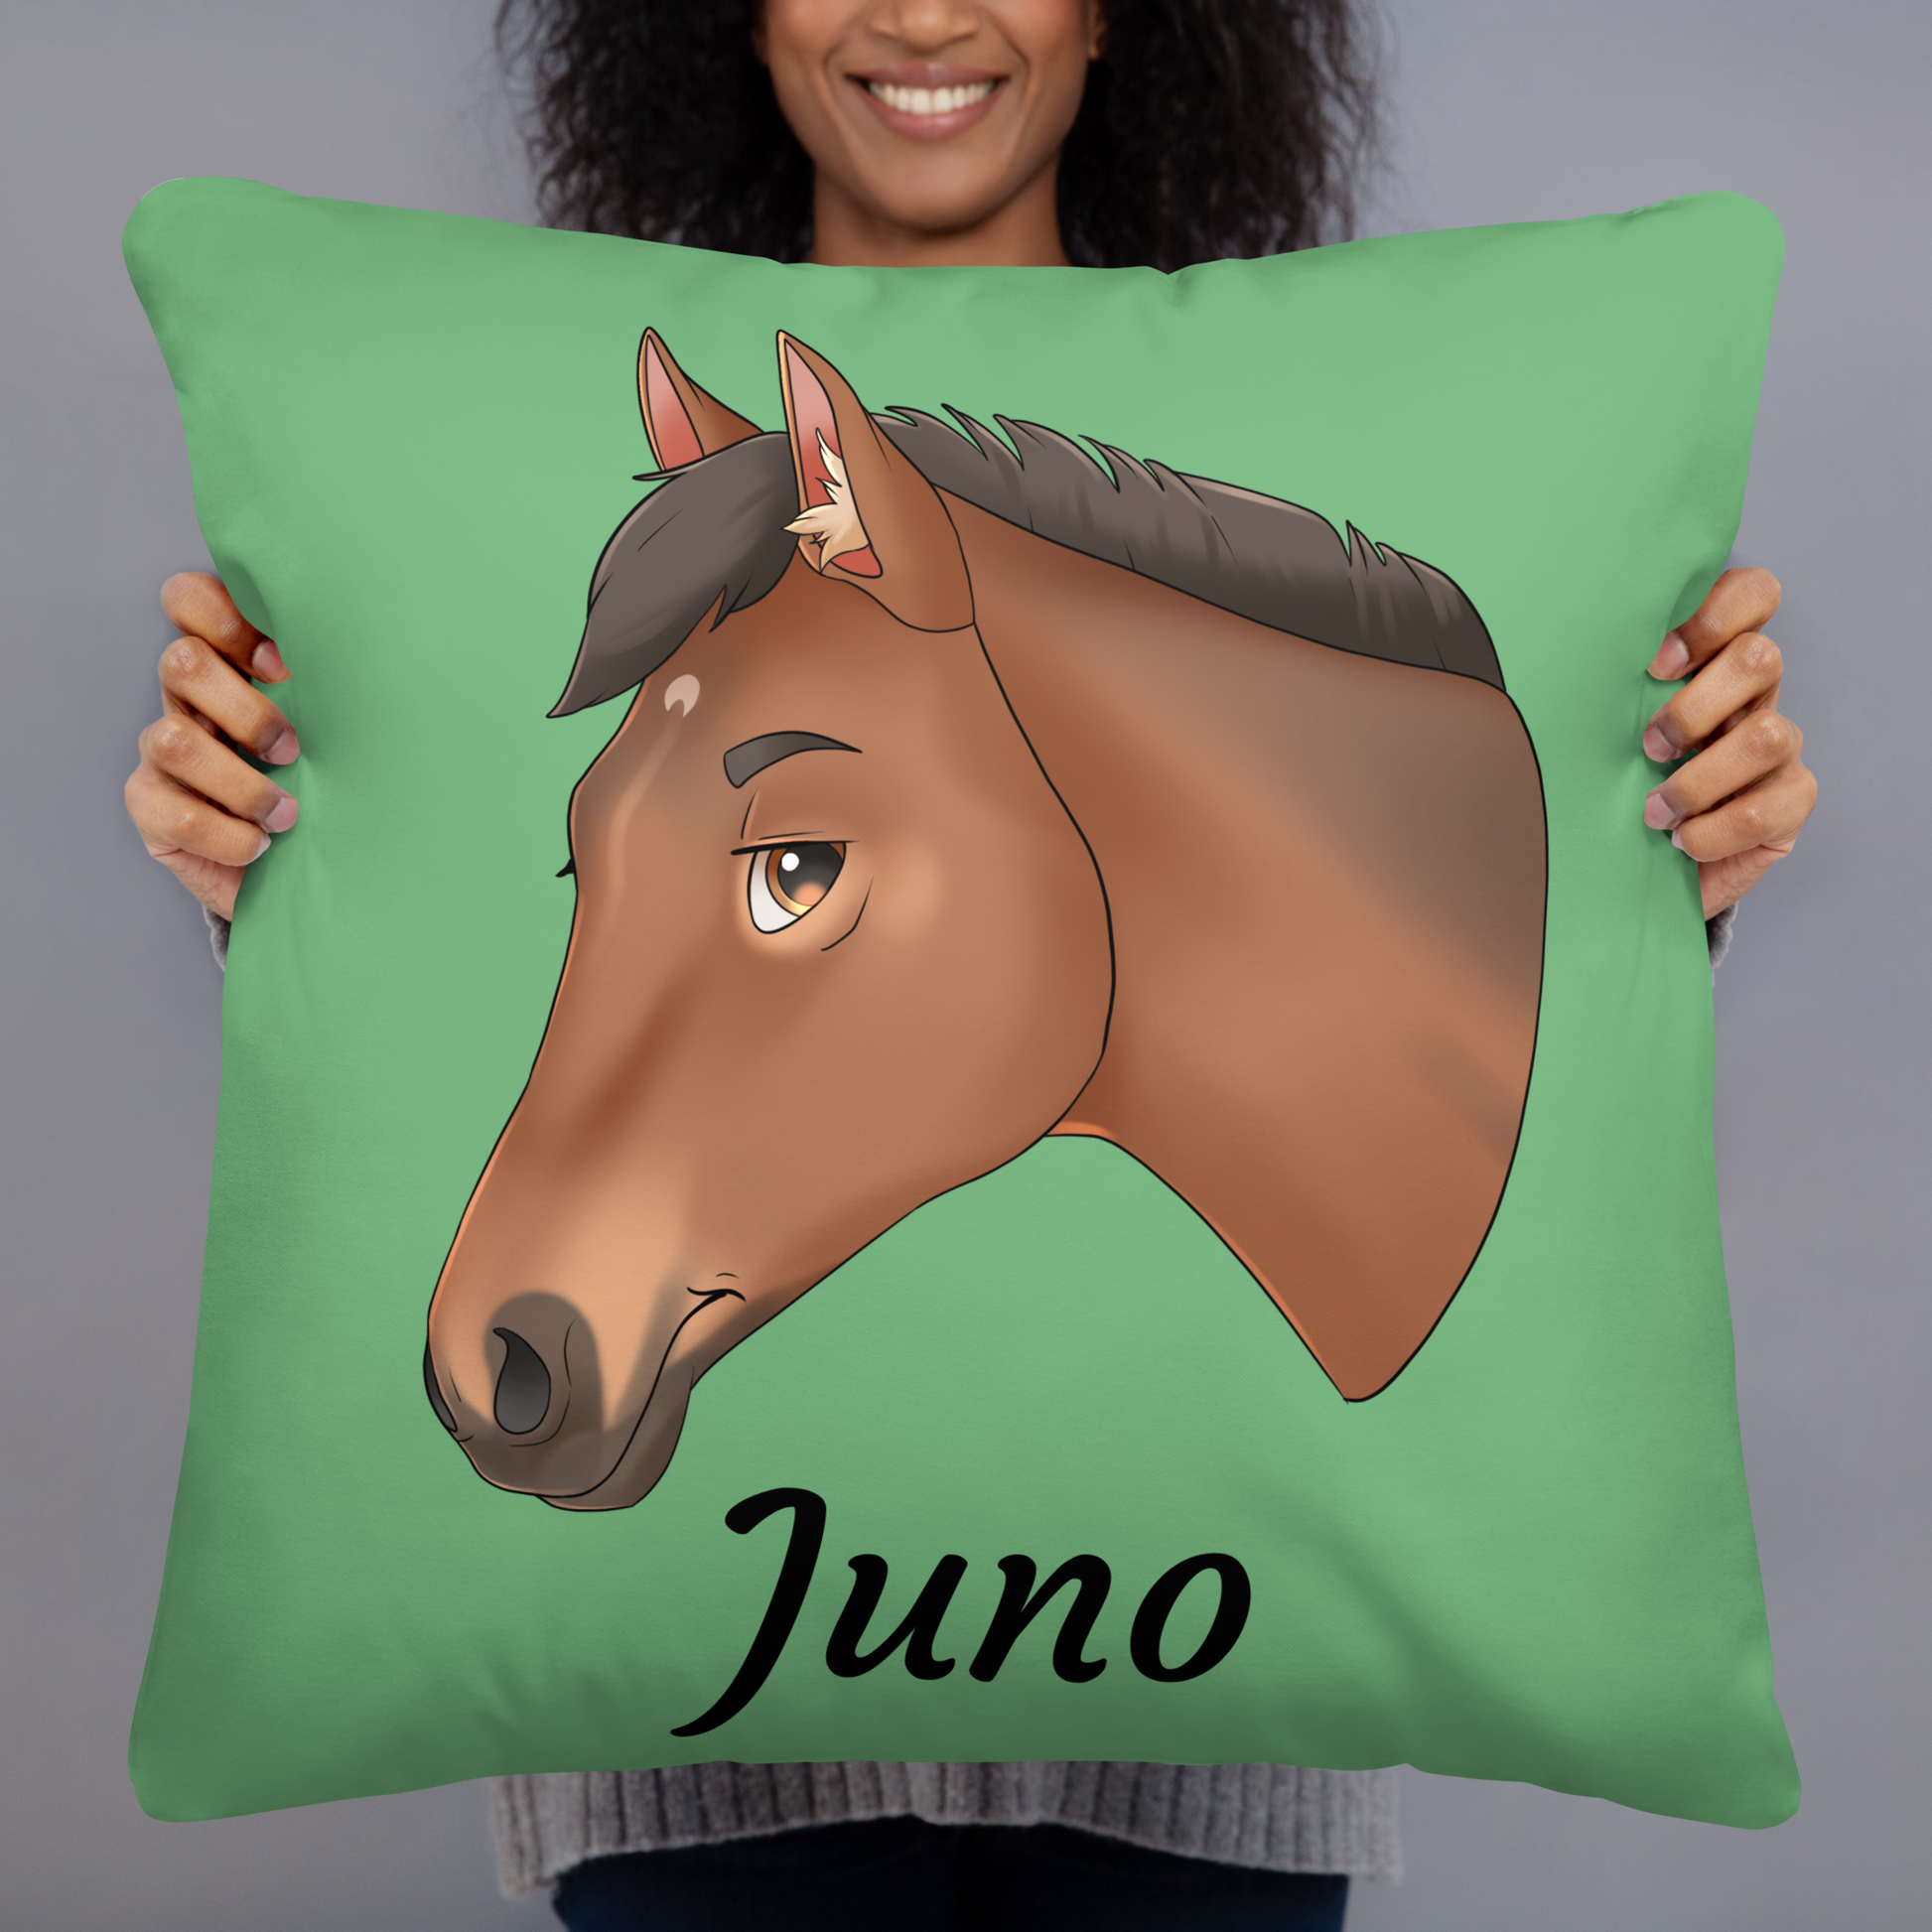 Hand Drawn Horse || Horse Square Throw Pillow - Fairytale Cartoon - Hand Drawn & Personalized; Hand drawn & personalized with your horse